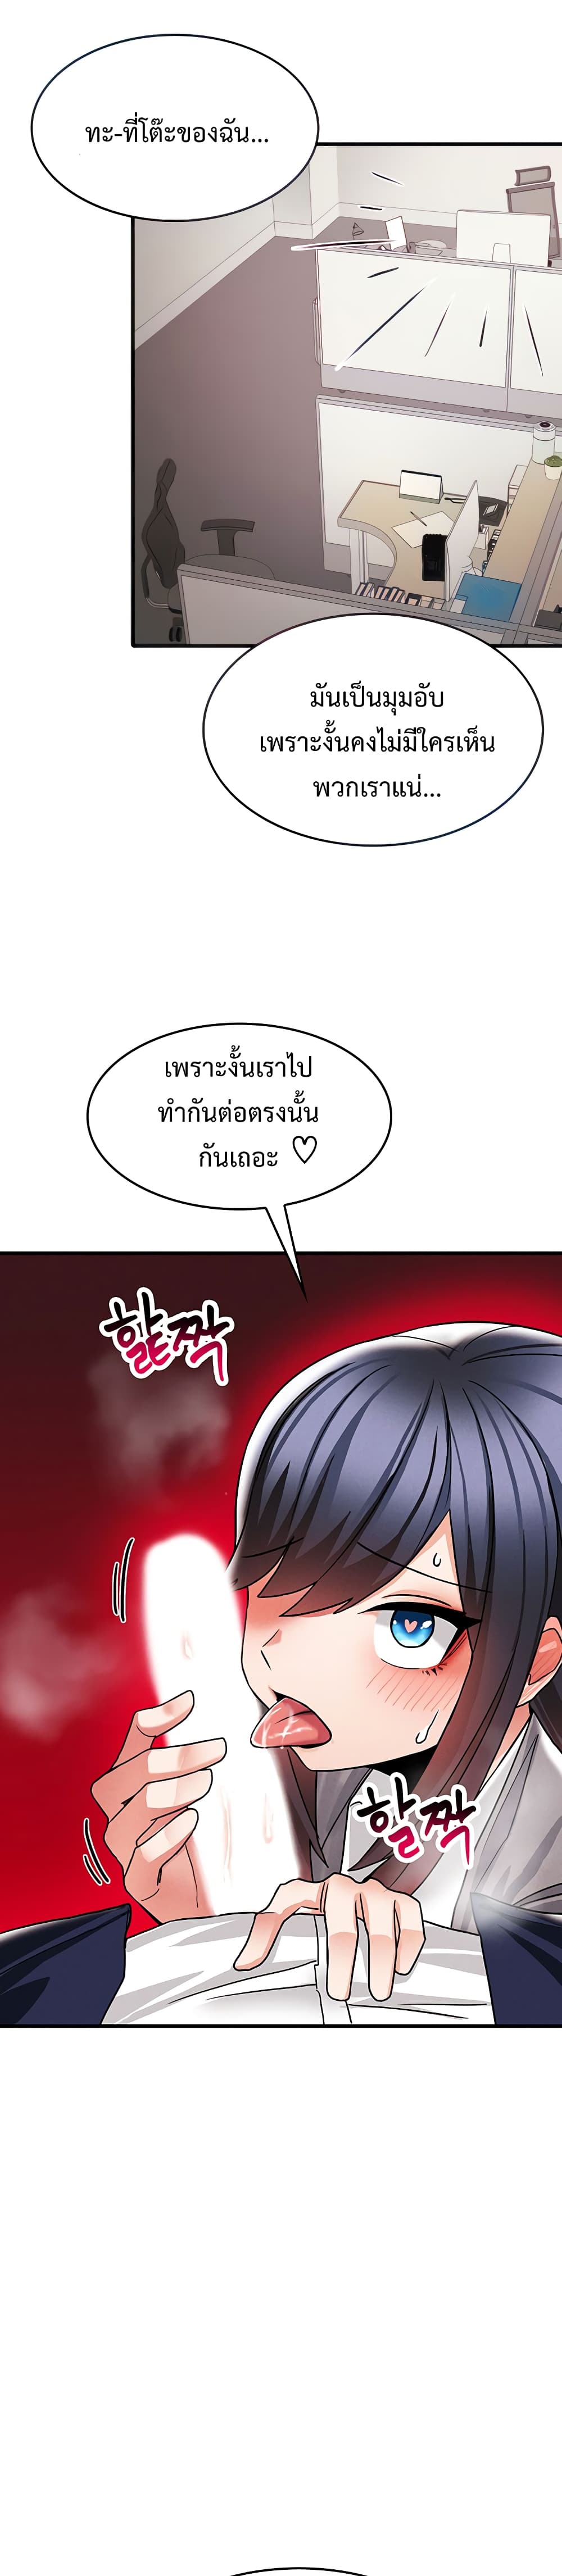 Relationship Reverse Button: Let’s Make Her Submissive 5 ภาพที่ 8